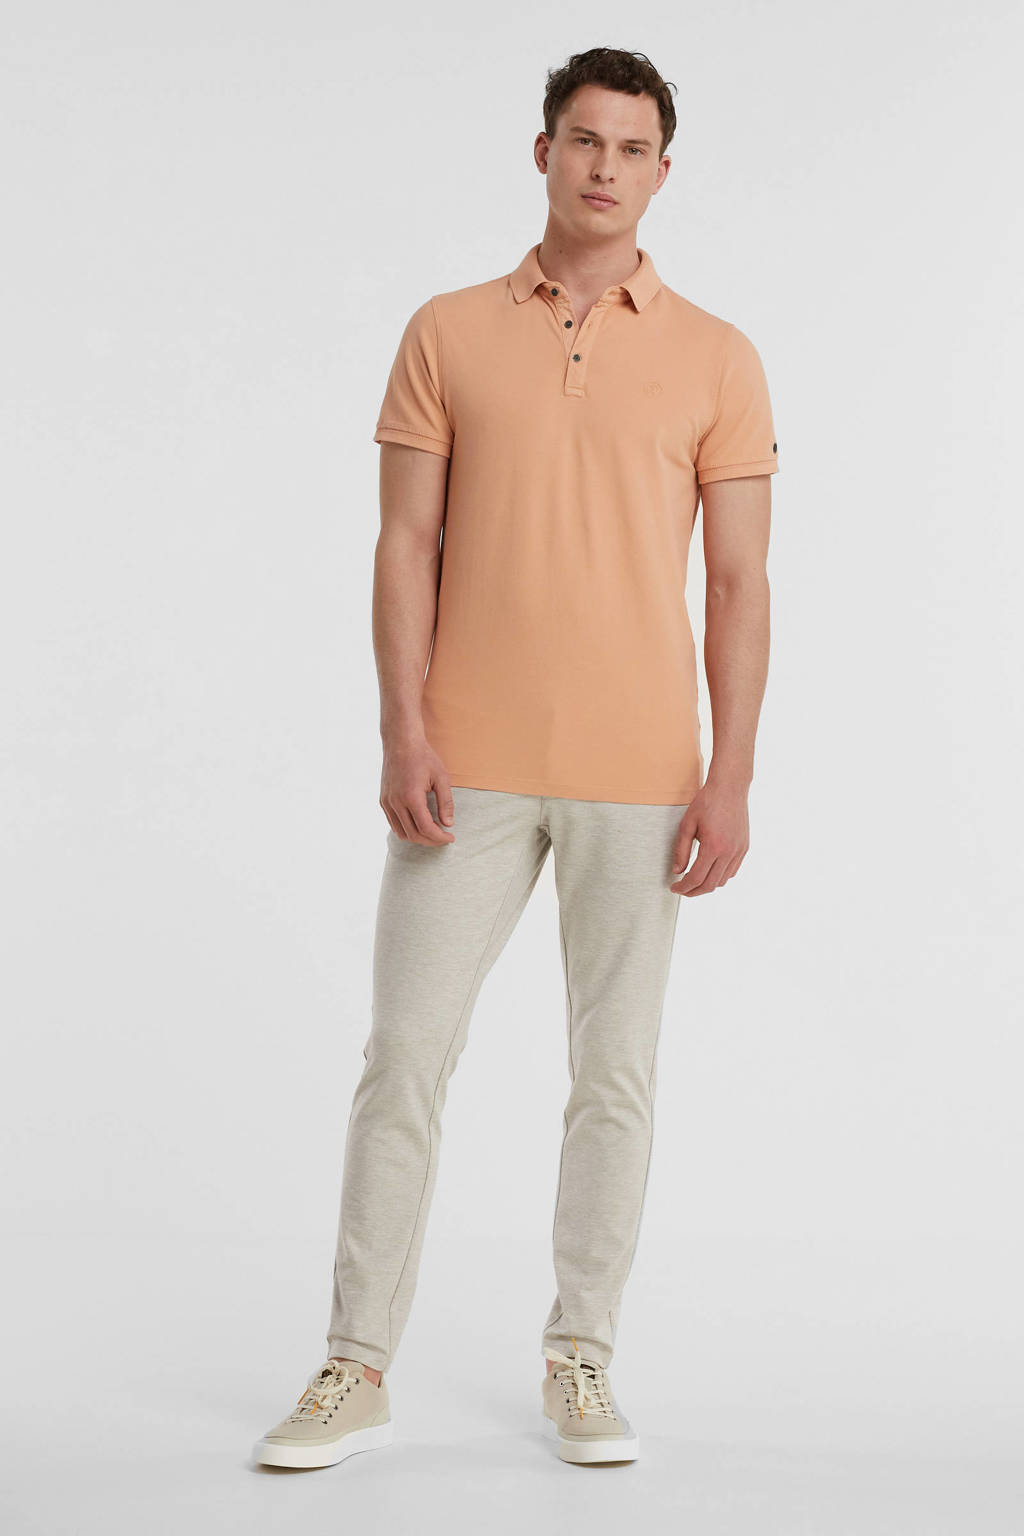 ONLY & SONS gemêleerde tapered fit broek ONSMARK chinchilla, Chinchilla